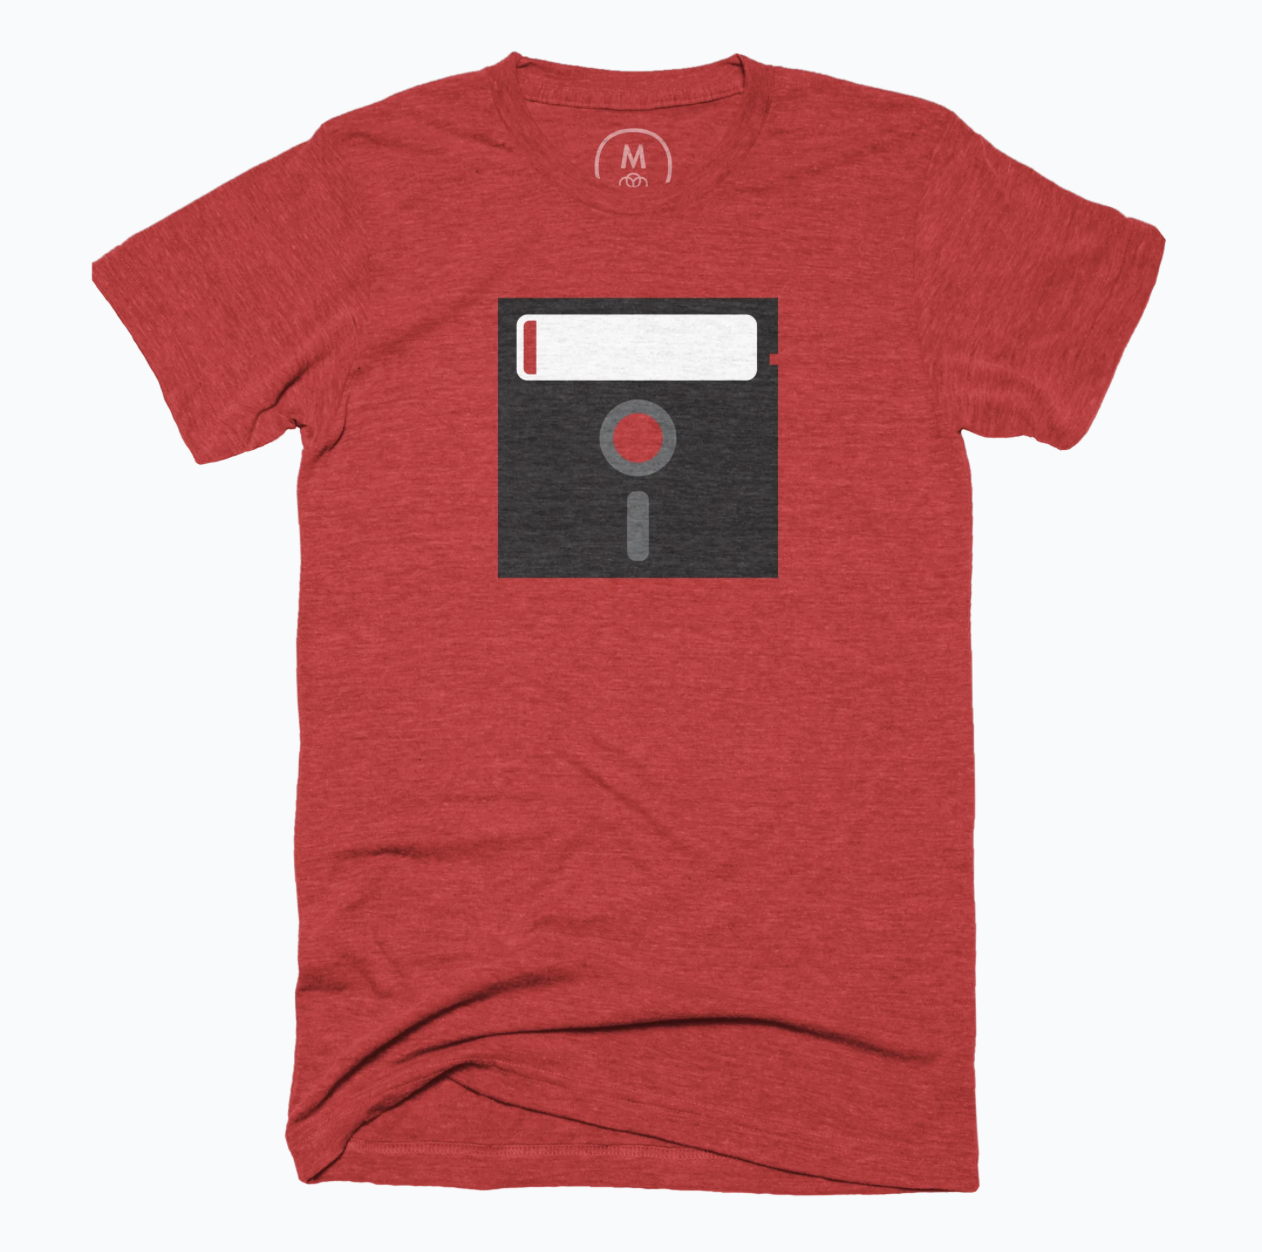 A red shirt with a 5.25 inch floppy disk.